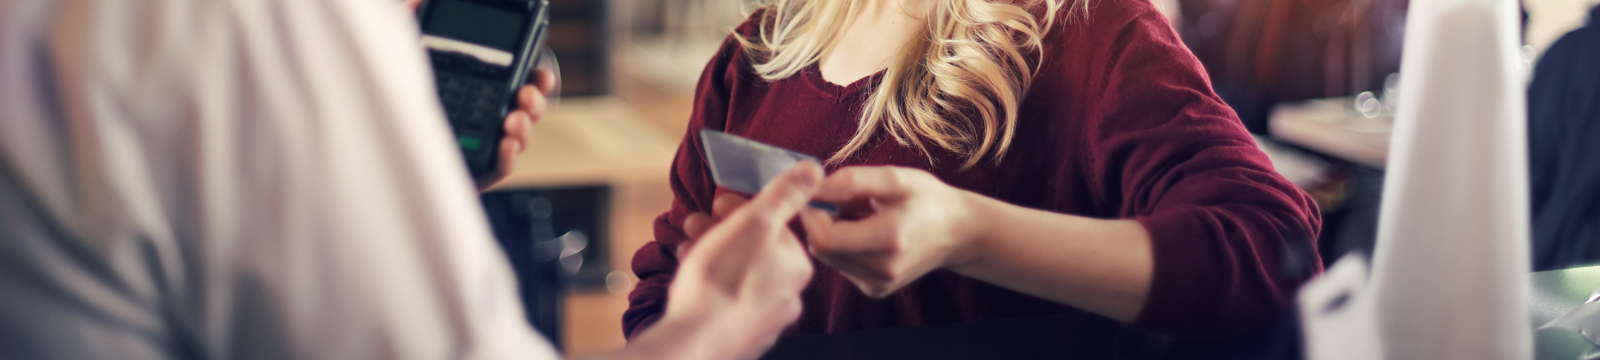 Cropped image of woman handing debit card to store employee